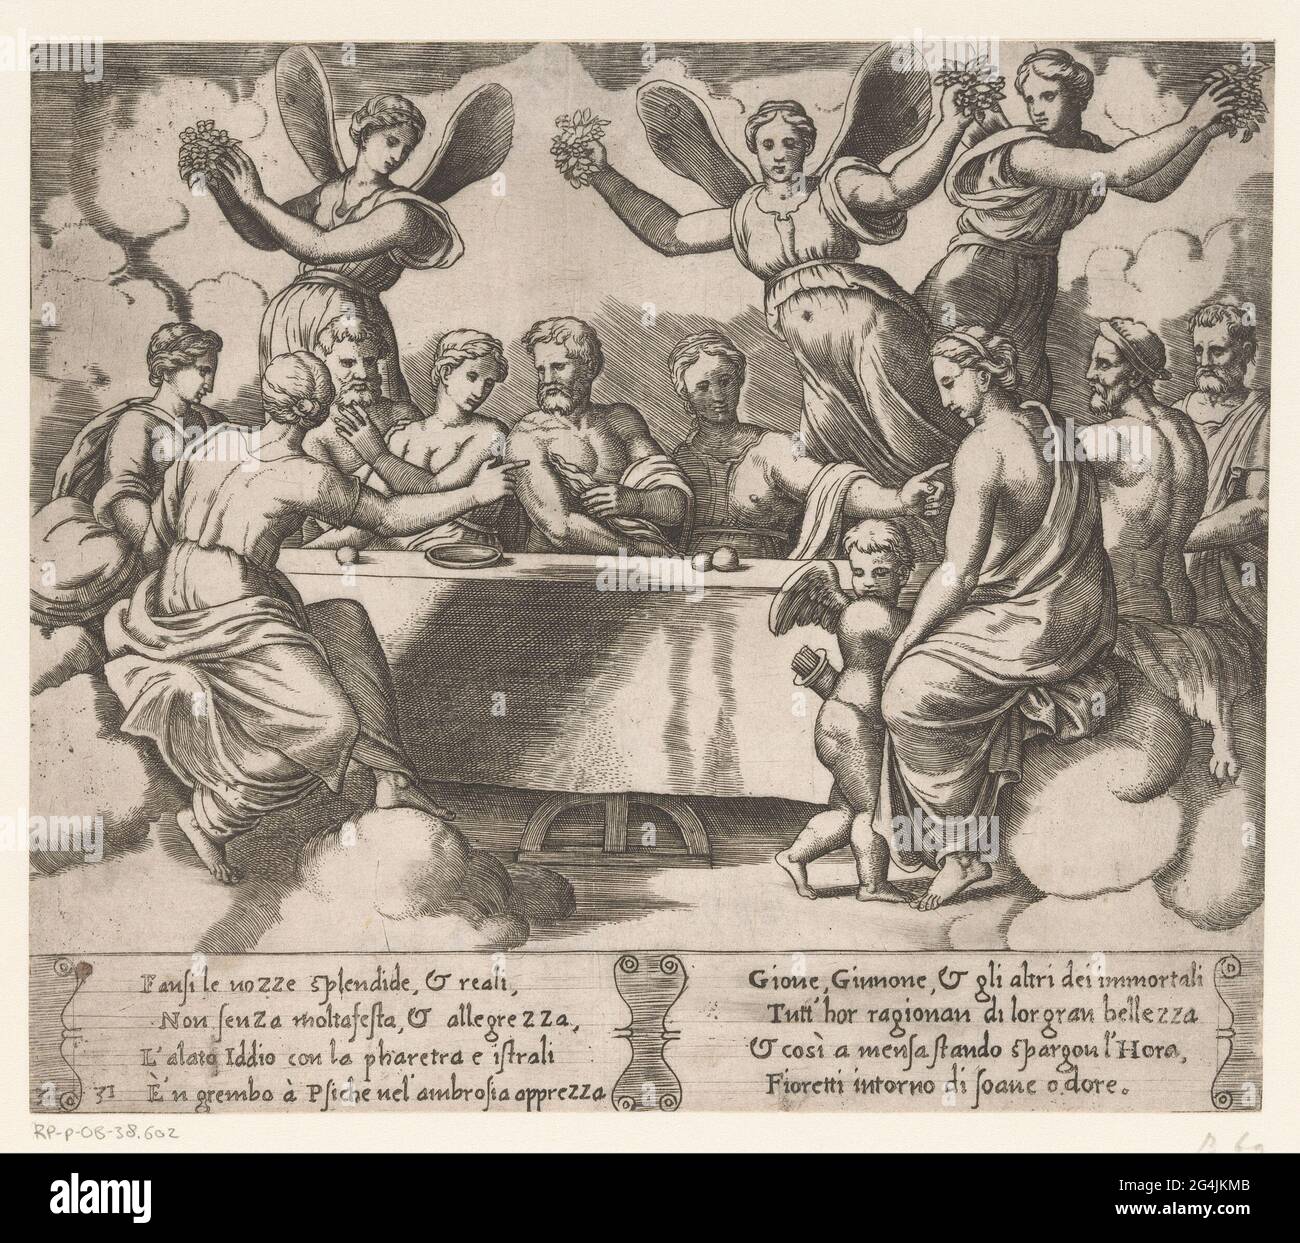 Wedding of Amor and Psyche; Story of Amor and Psyche. Banquet during the  Amor's wedding and psyche. Around a long table are Amor and Psyche with a  number of other gods. On